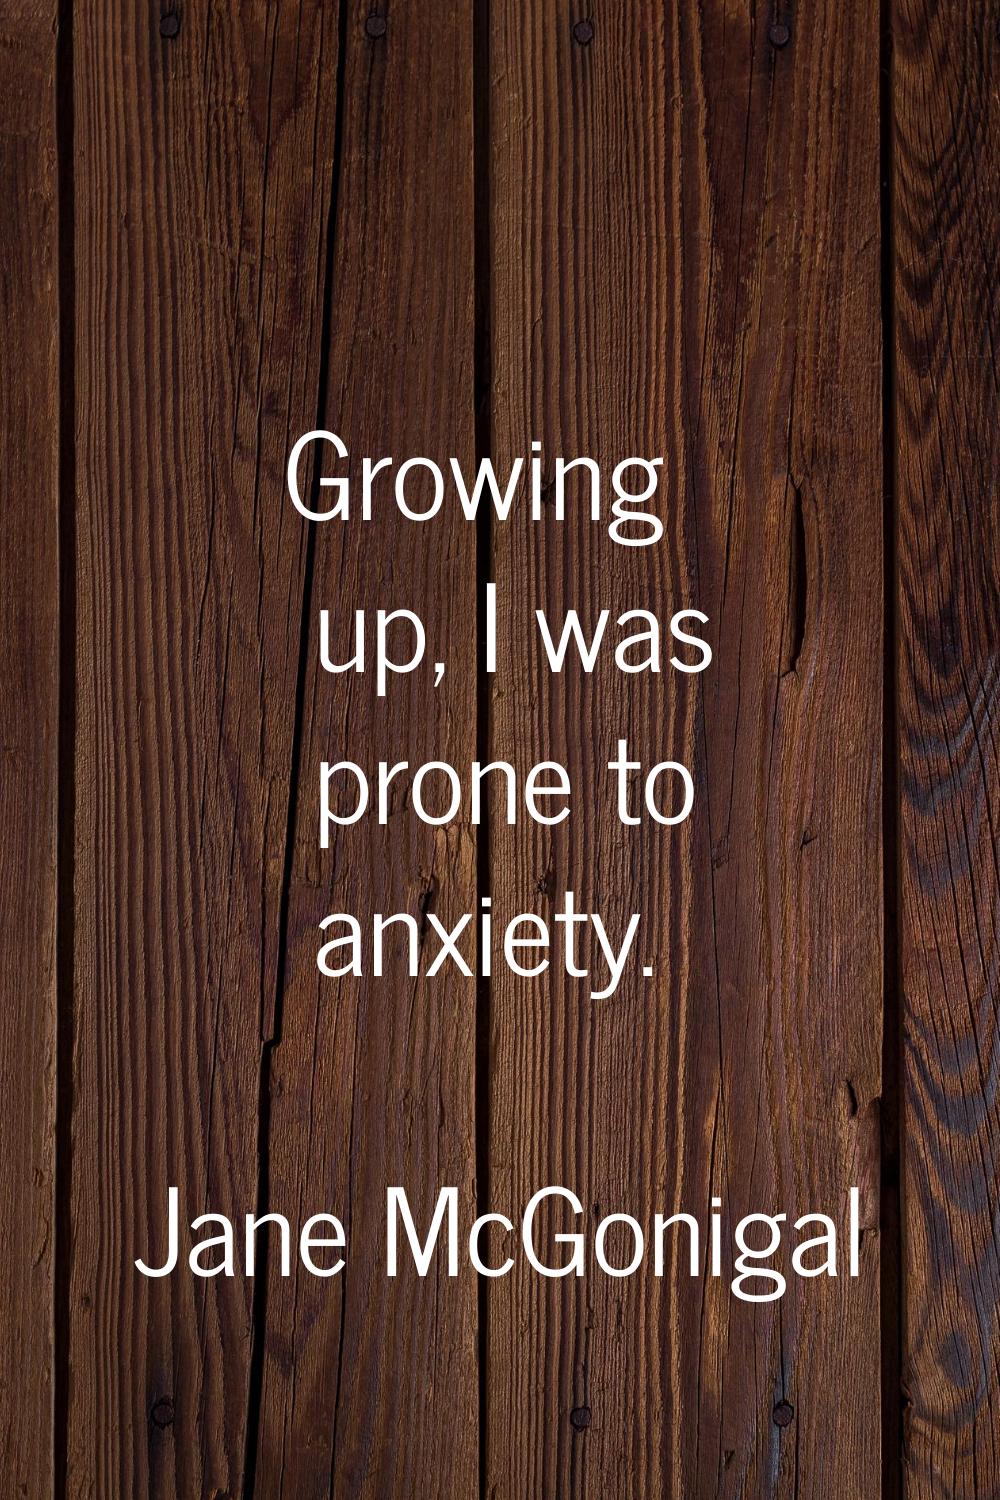 Growing up, I was prone to anxiety.